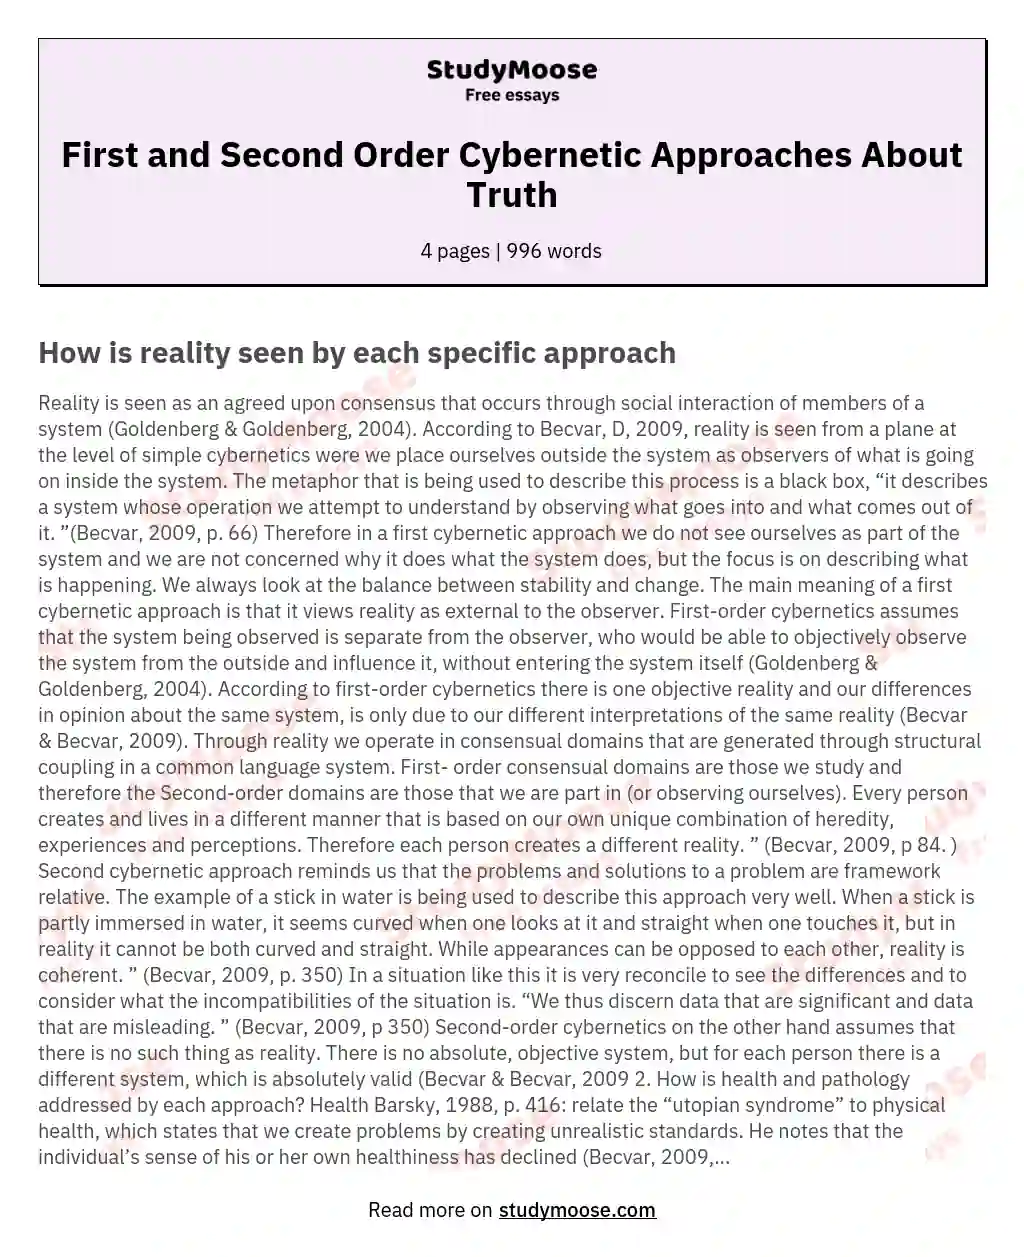 First and Second Order Cybernetic Approaches About Truth